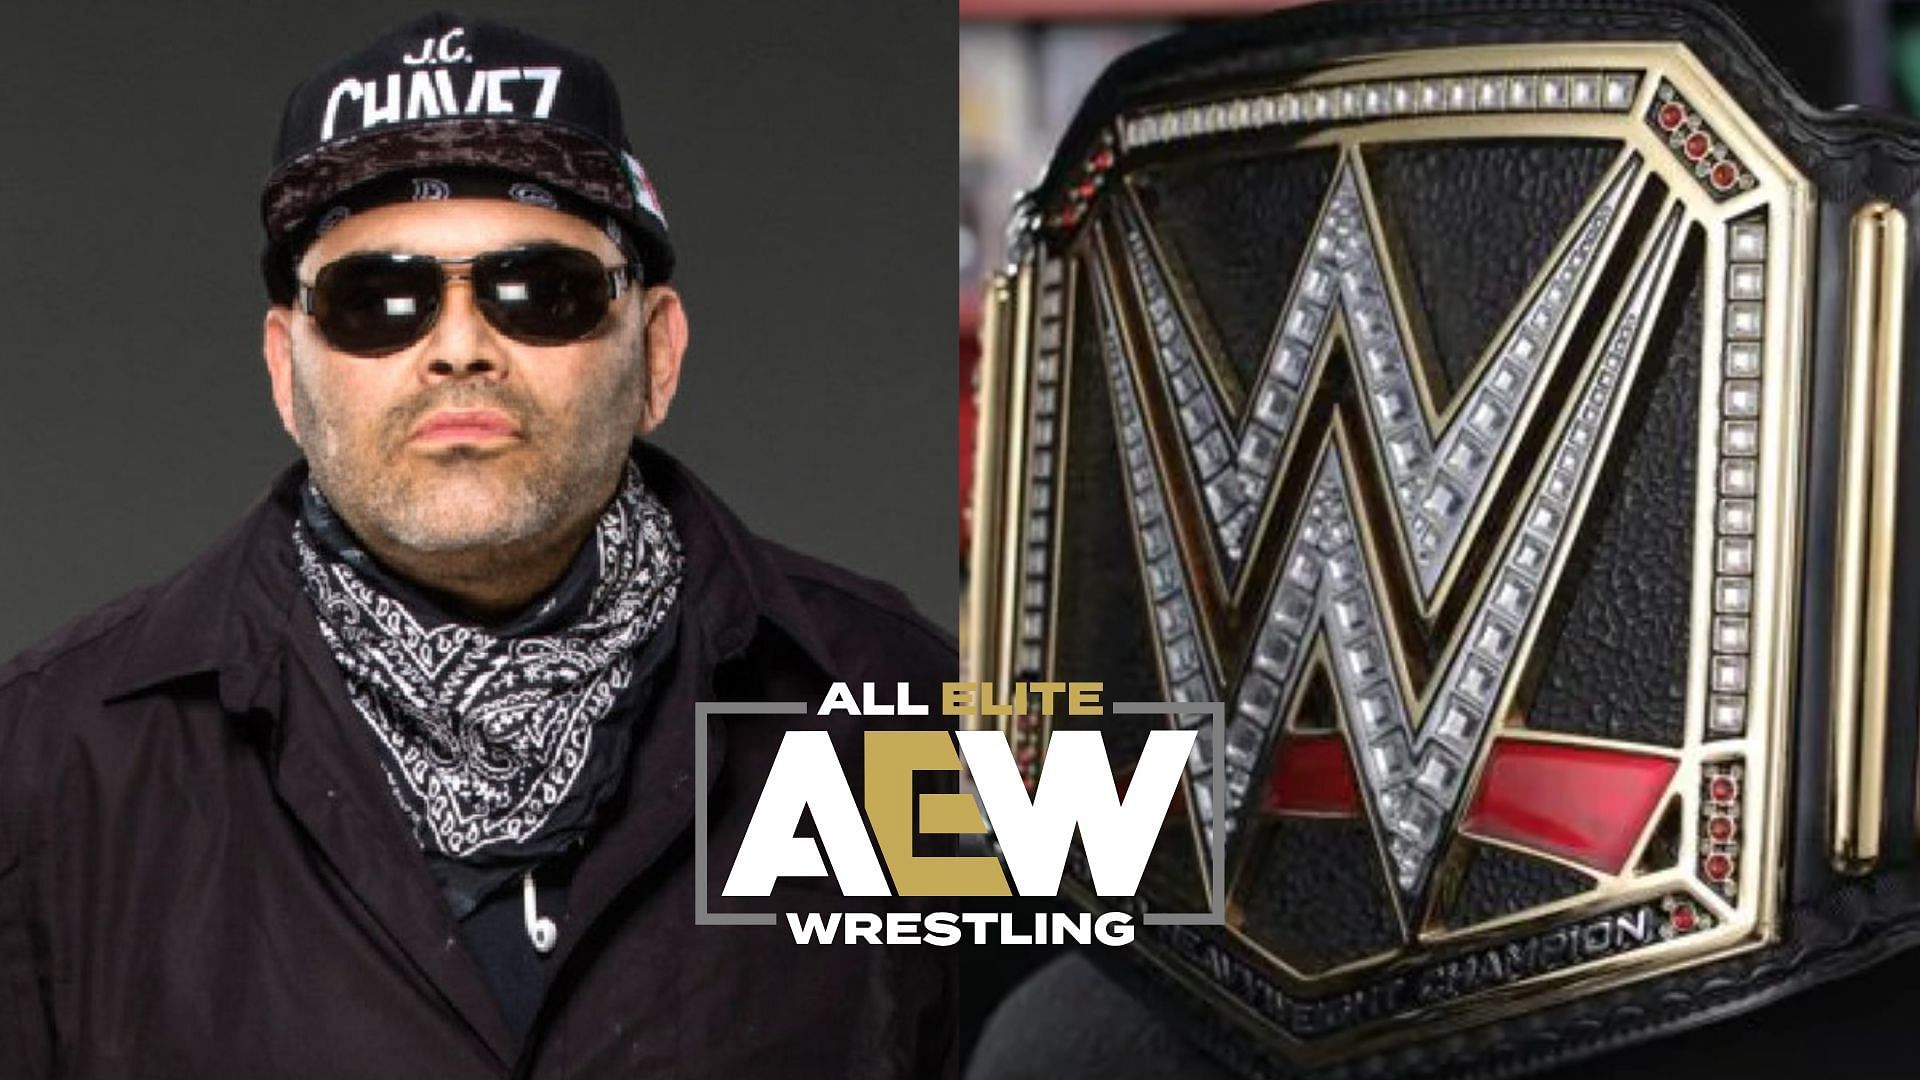 Which WWE Champion is Konnan looking forward to seeing again?